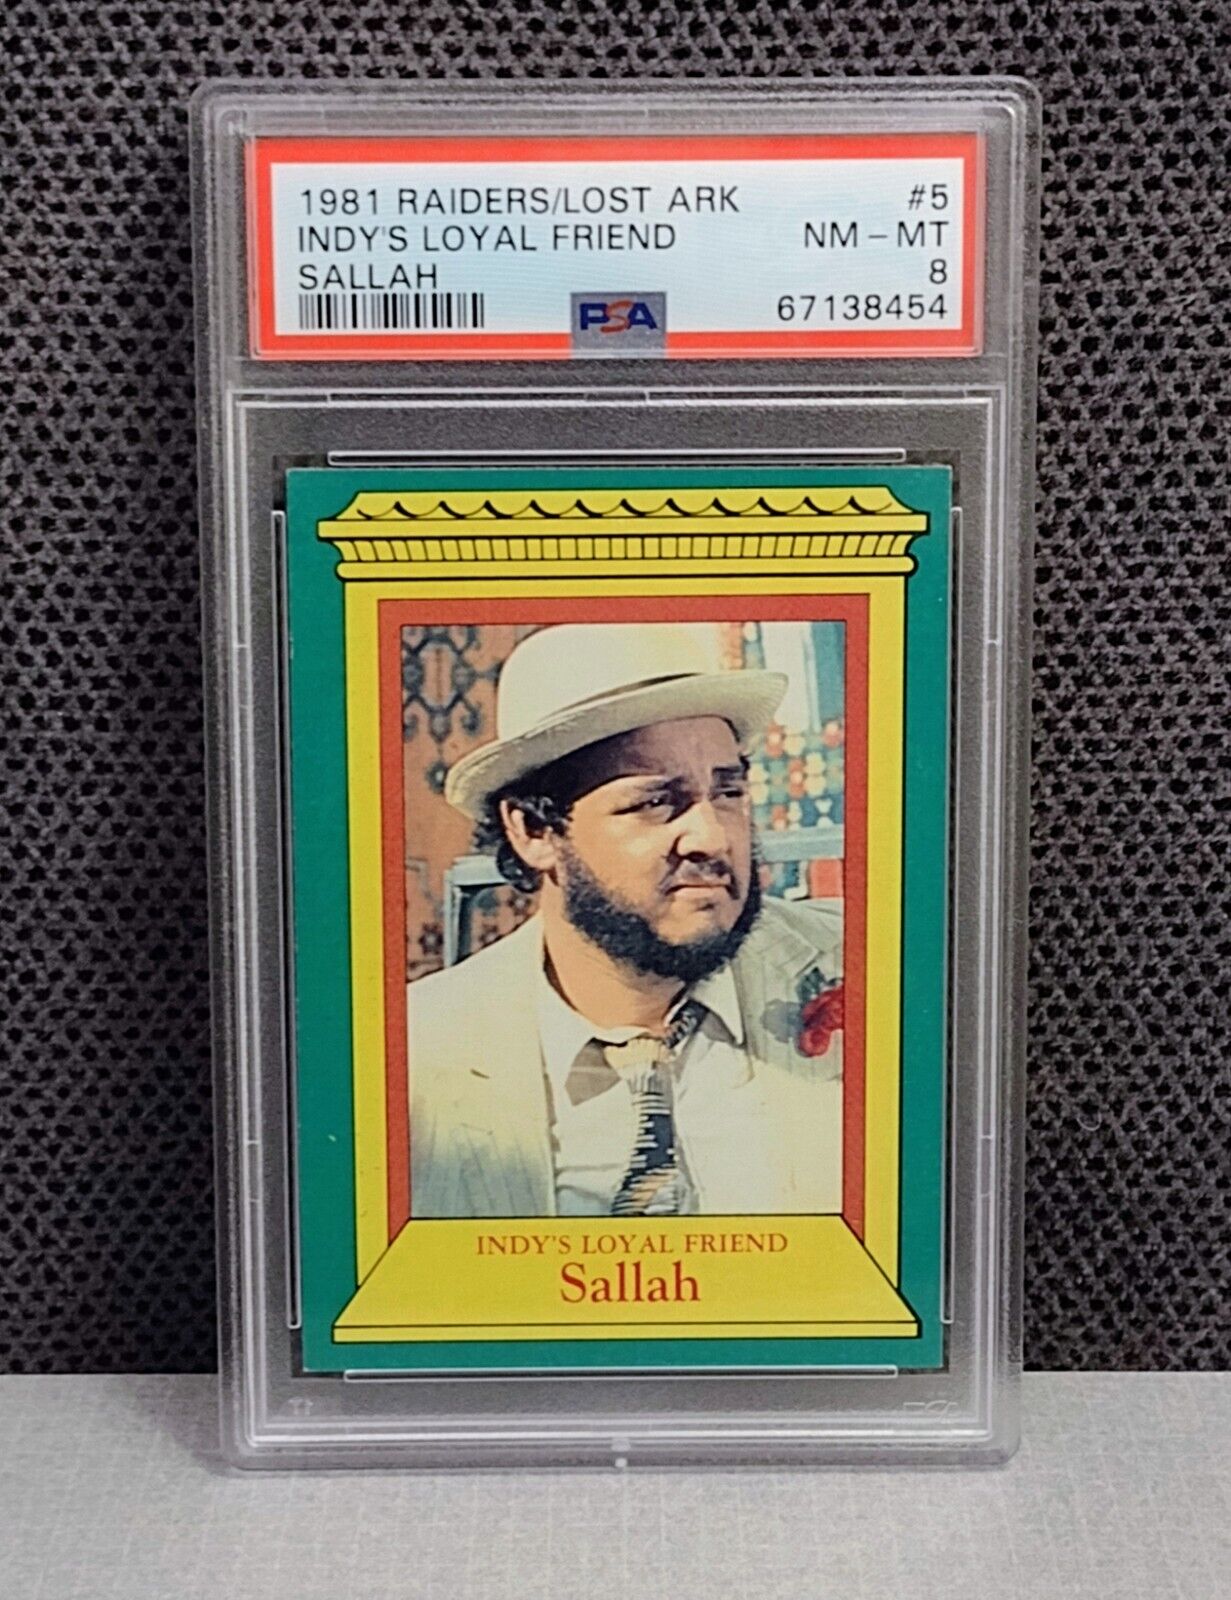 1981 Raiders of the Lost Ark #5 SALLAH Indy\'s Loyal Friend - PSA 8 NM-MT - Topps